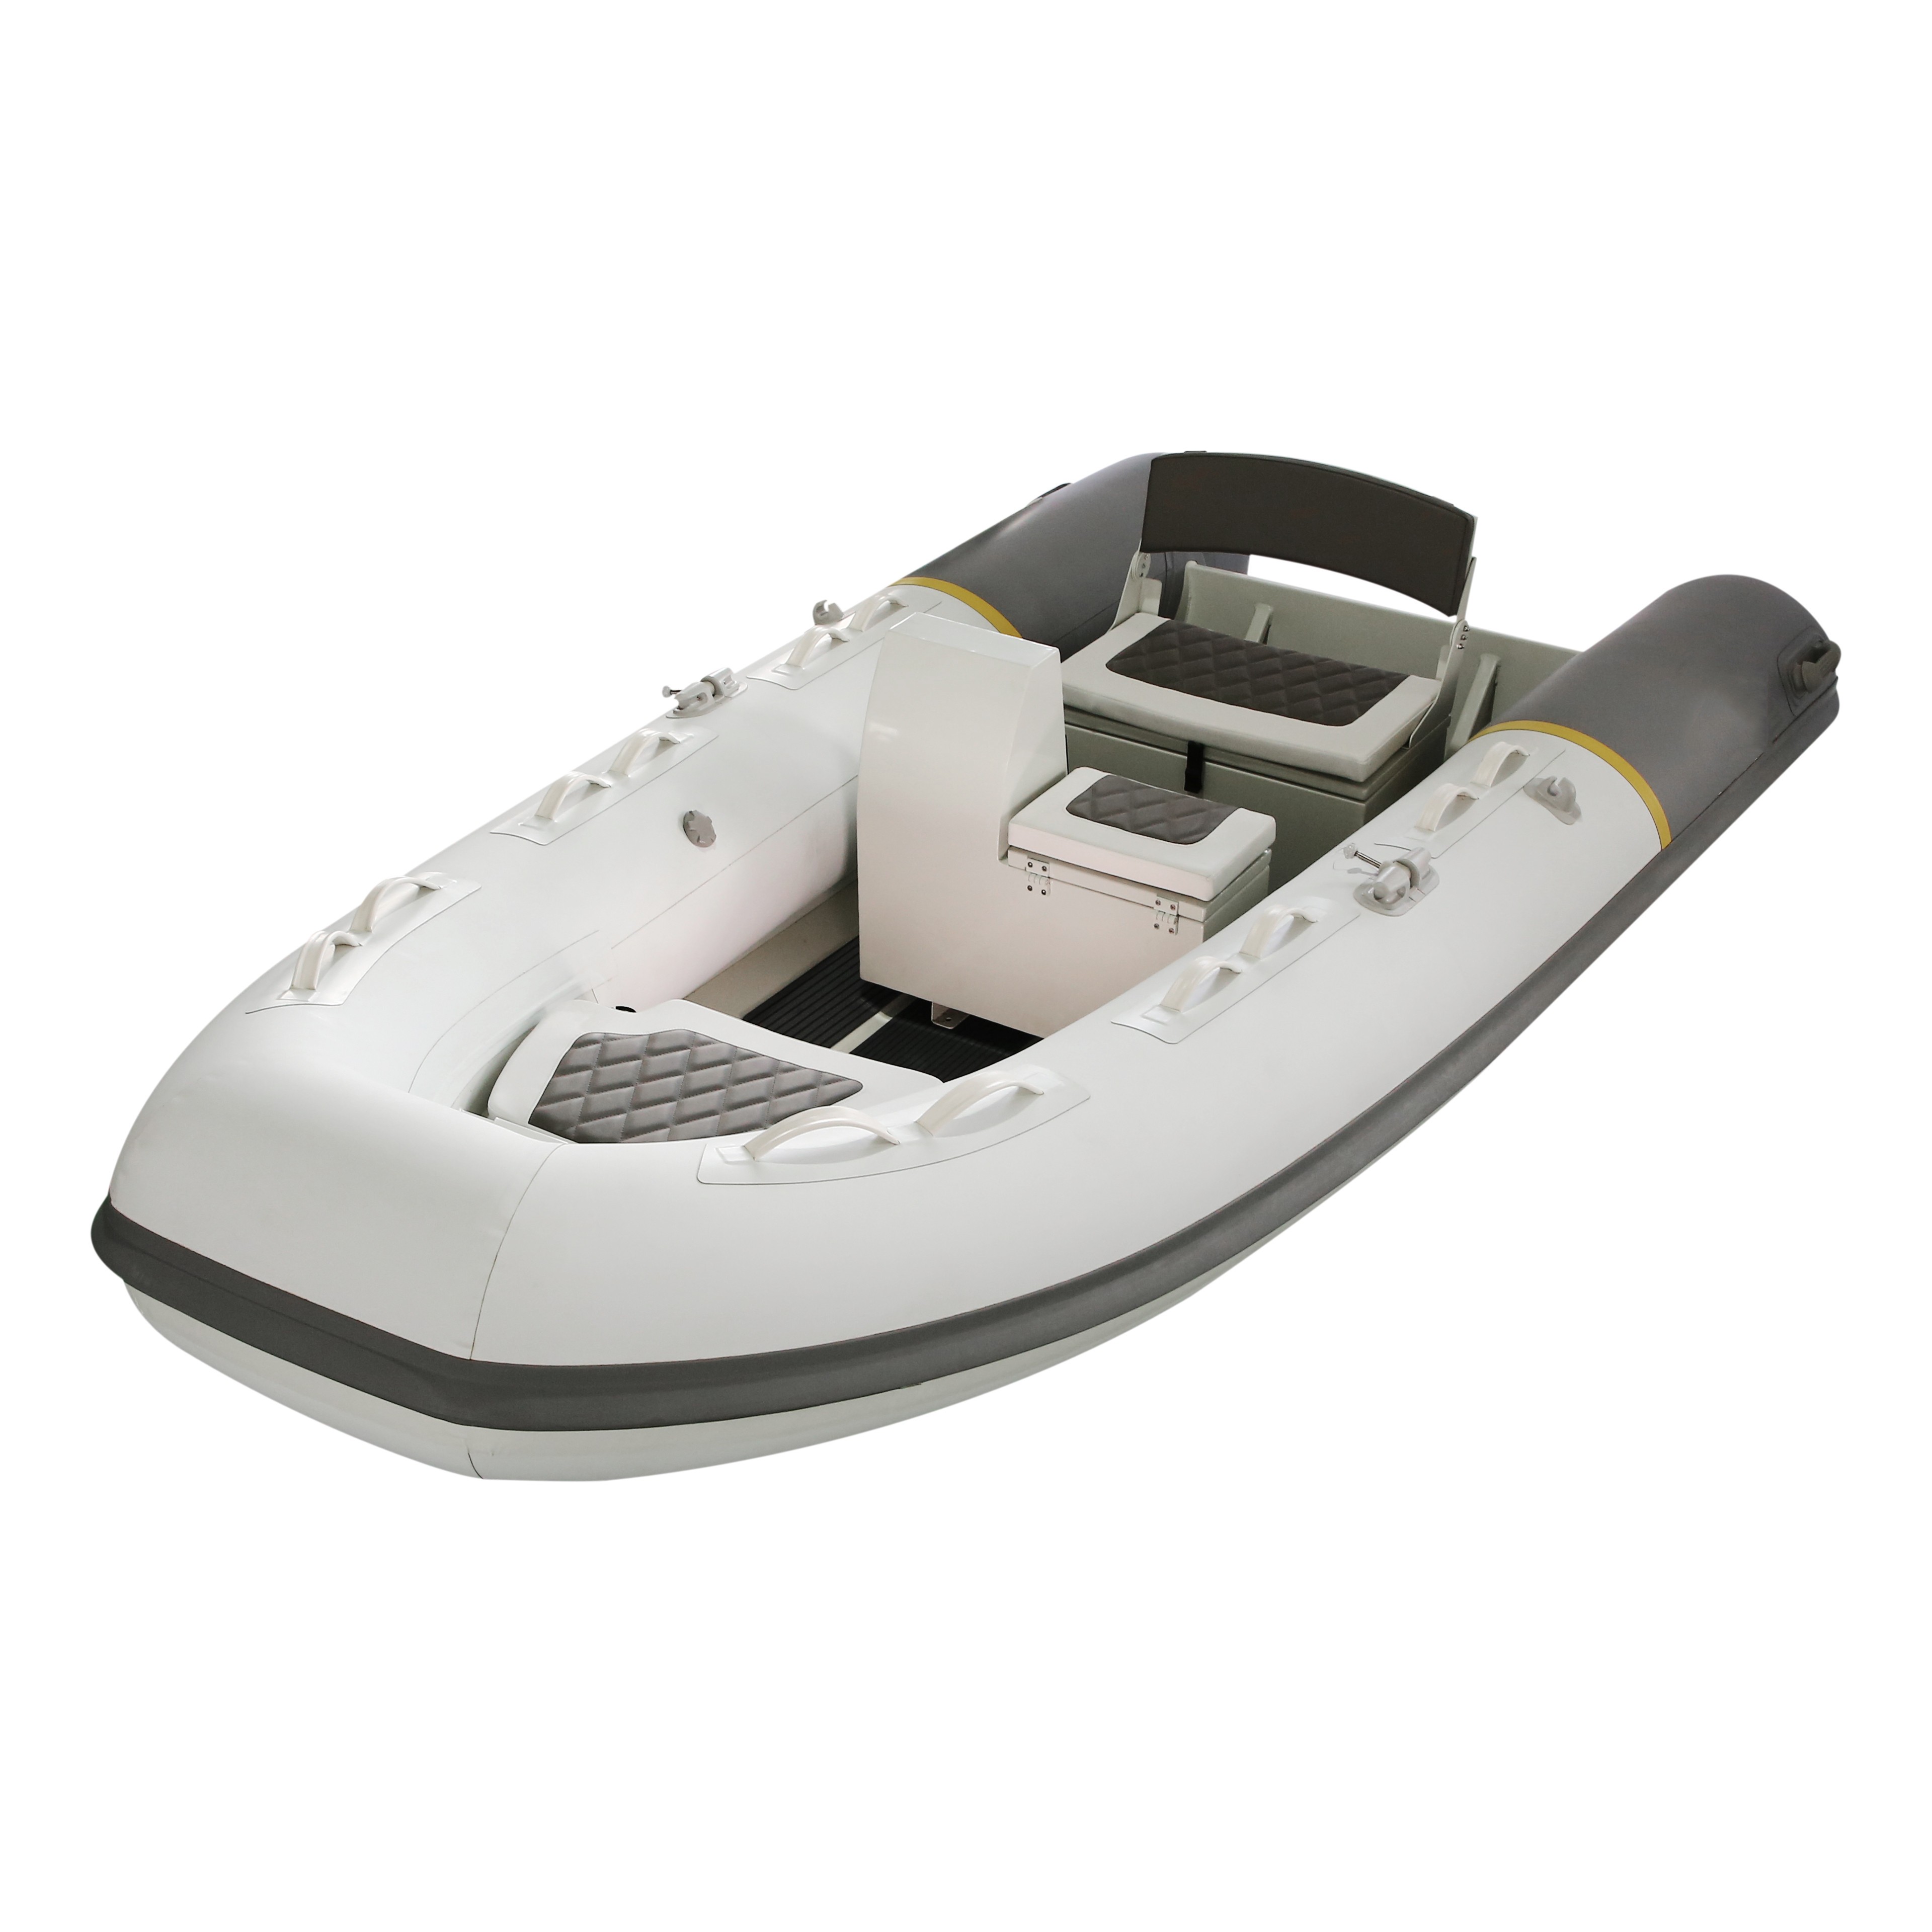 Inflatable sea boat with motor and center console rib boats for sale